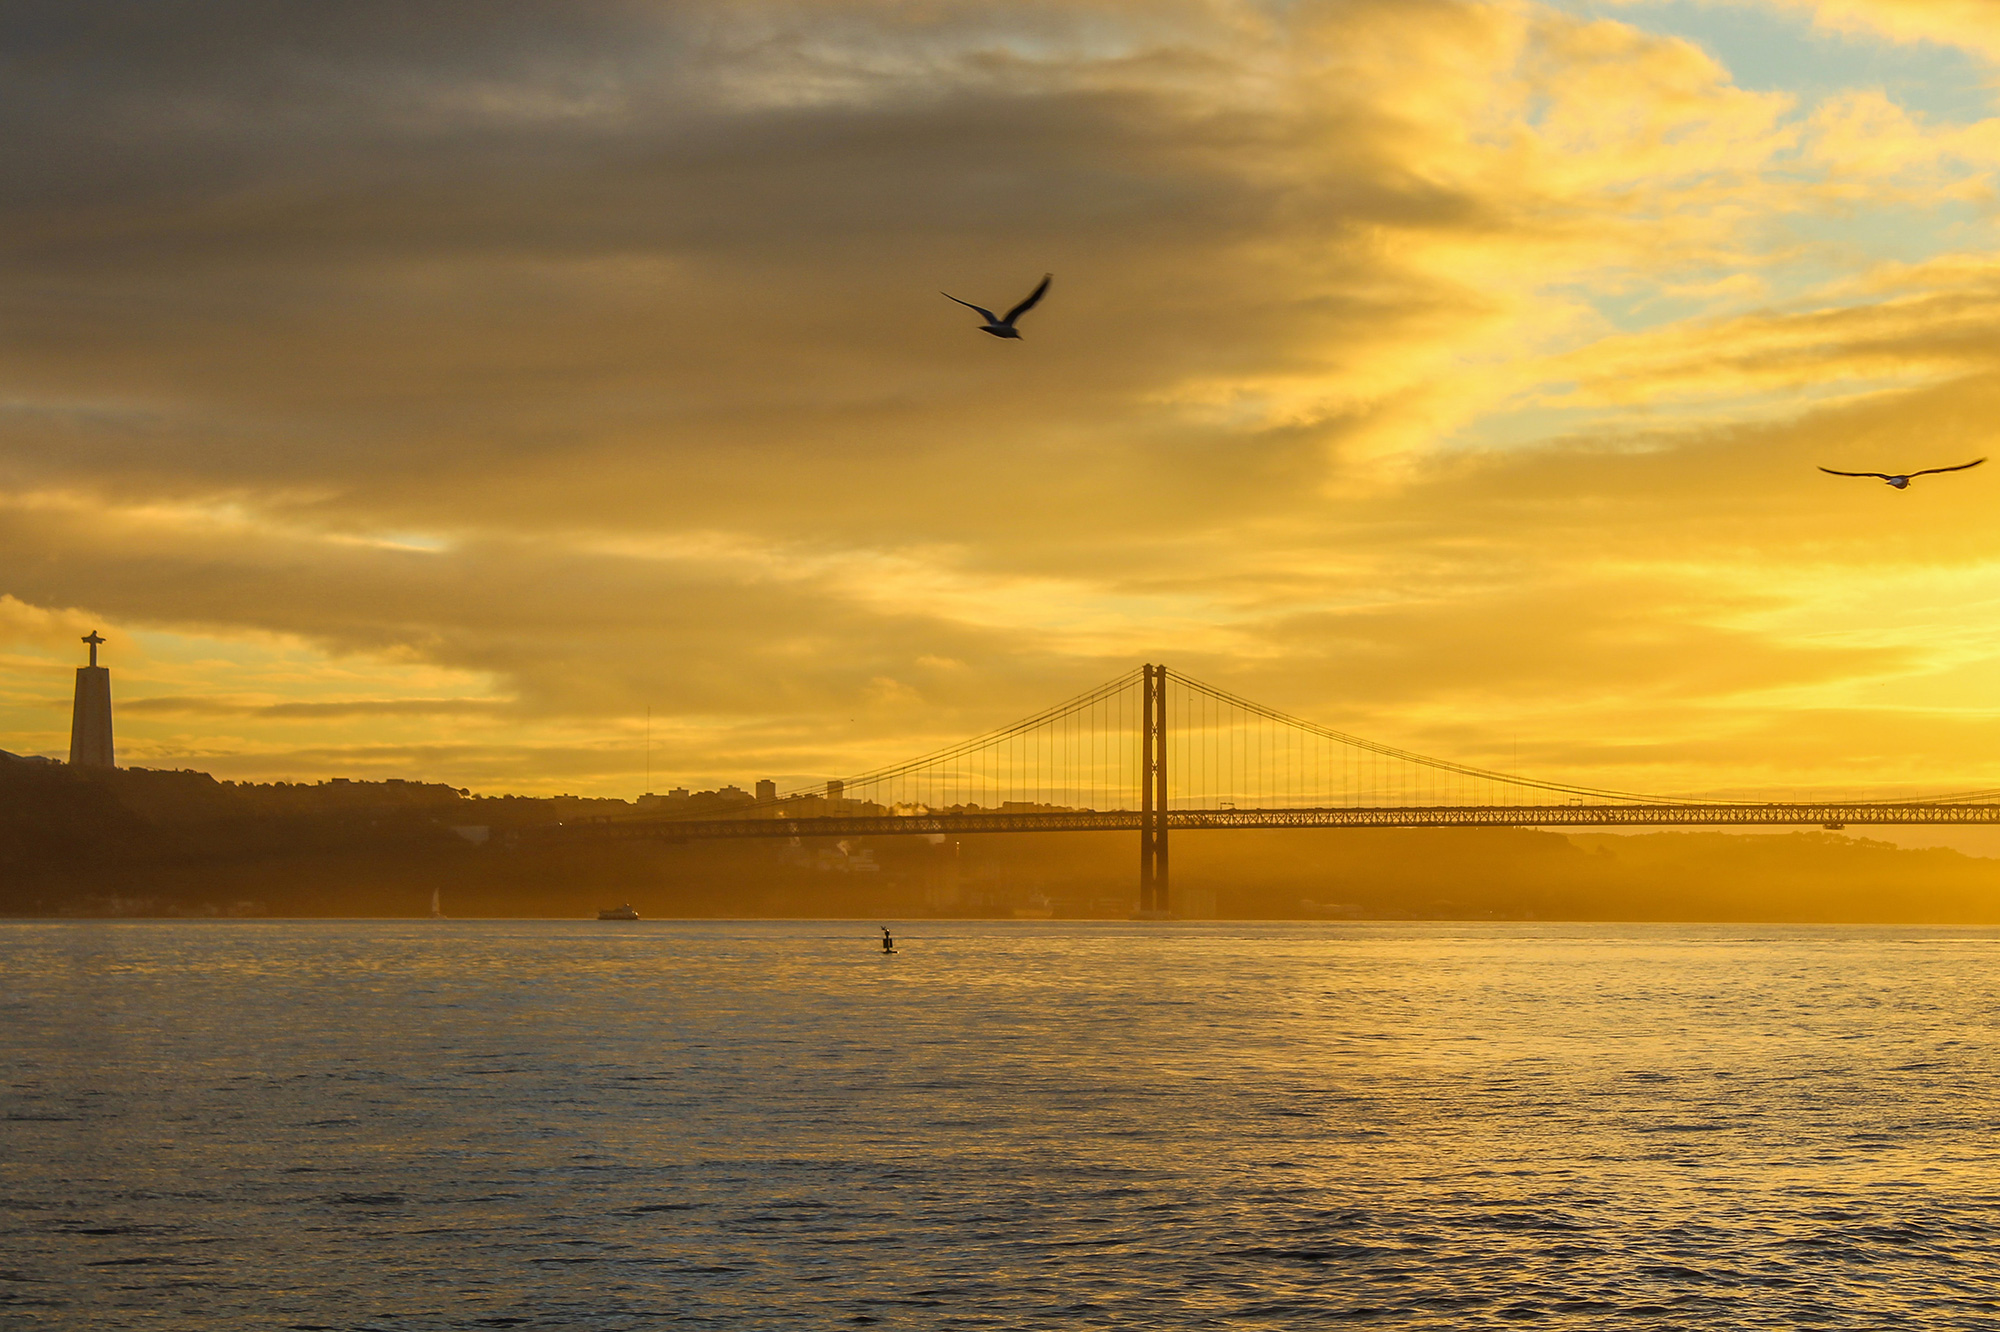 Sunset image of the Ponte 25 de Abril bridge in Lisbon Portugal with the Tagus river in the foreground